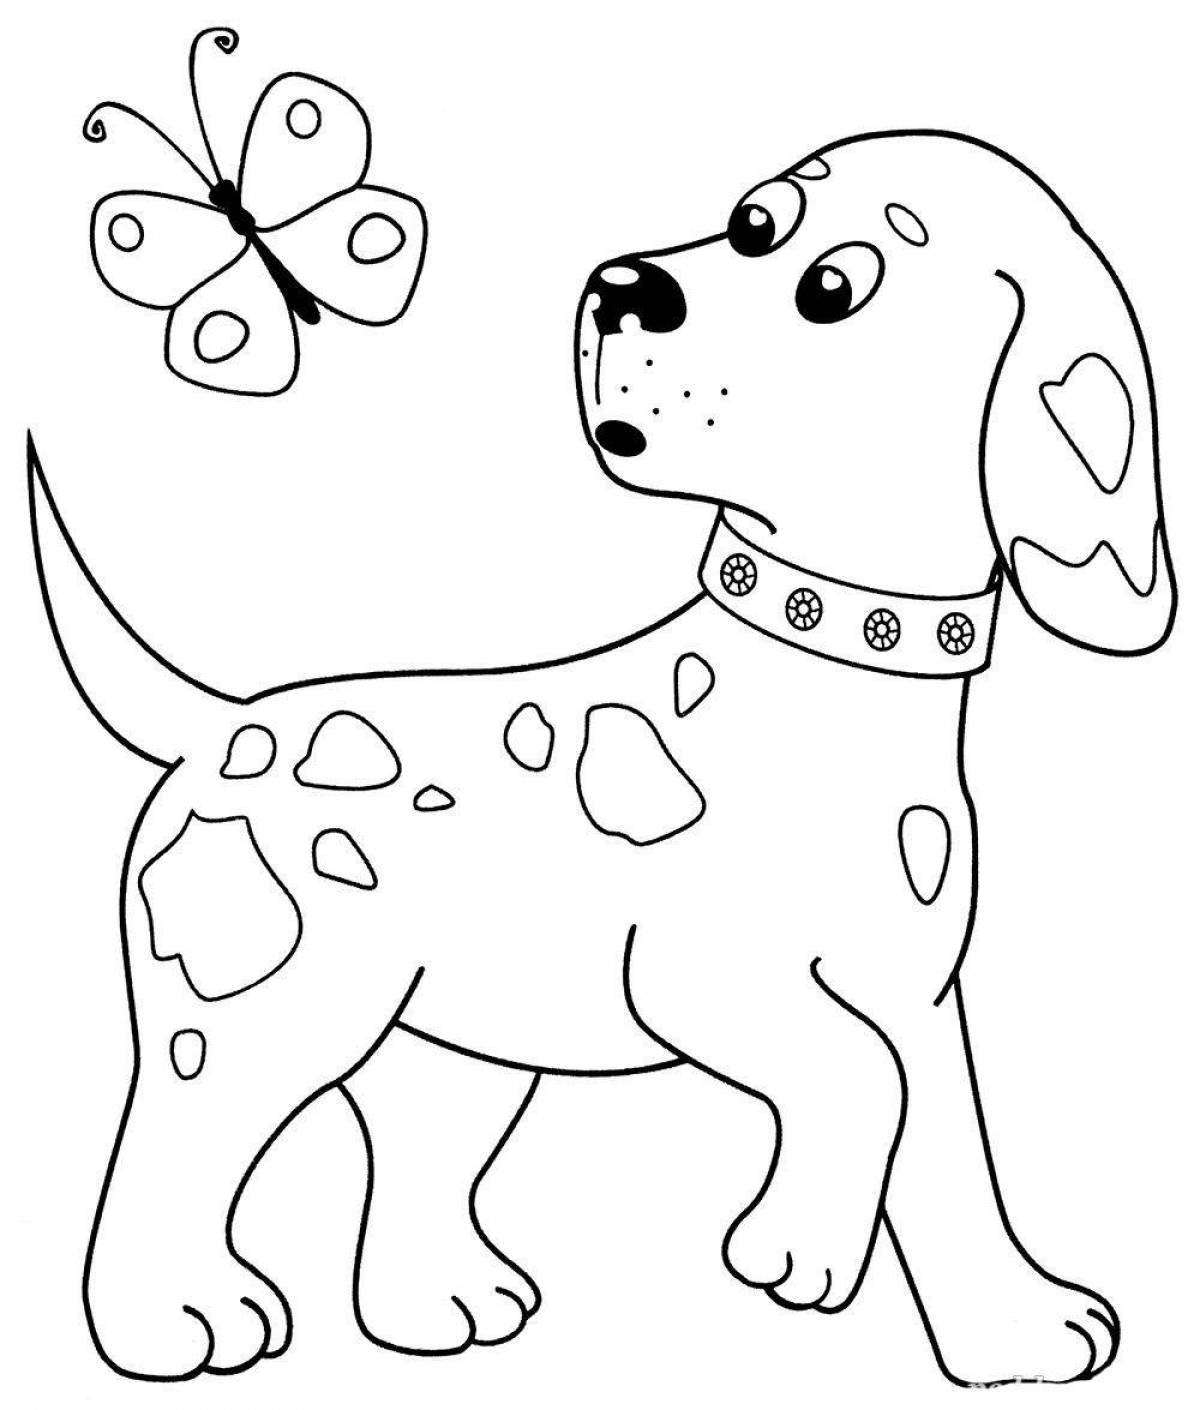 A fun dog coloring book for kids